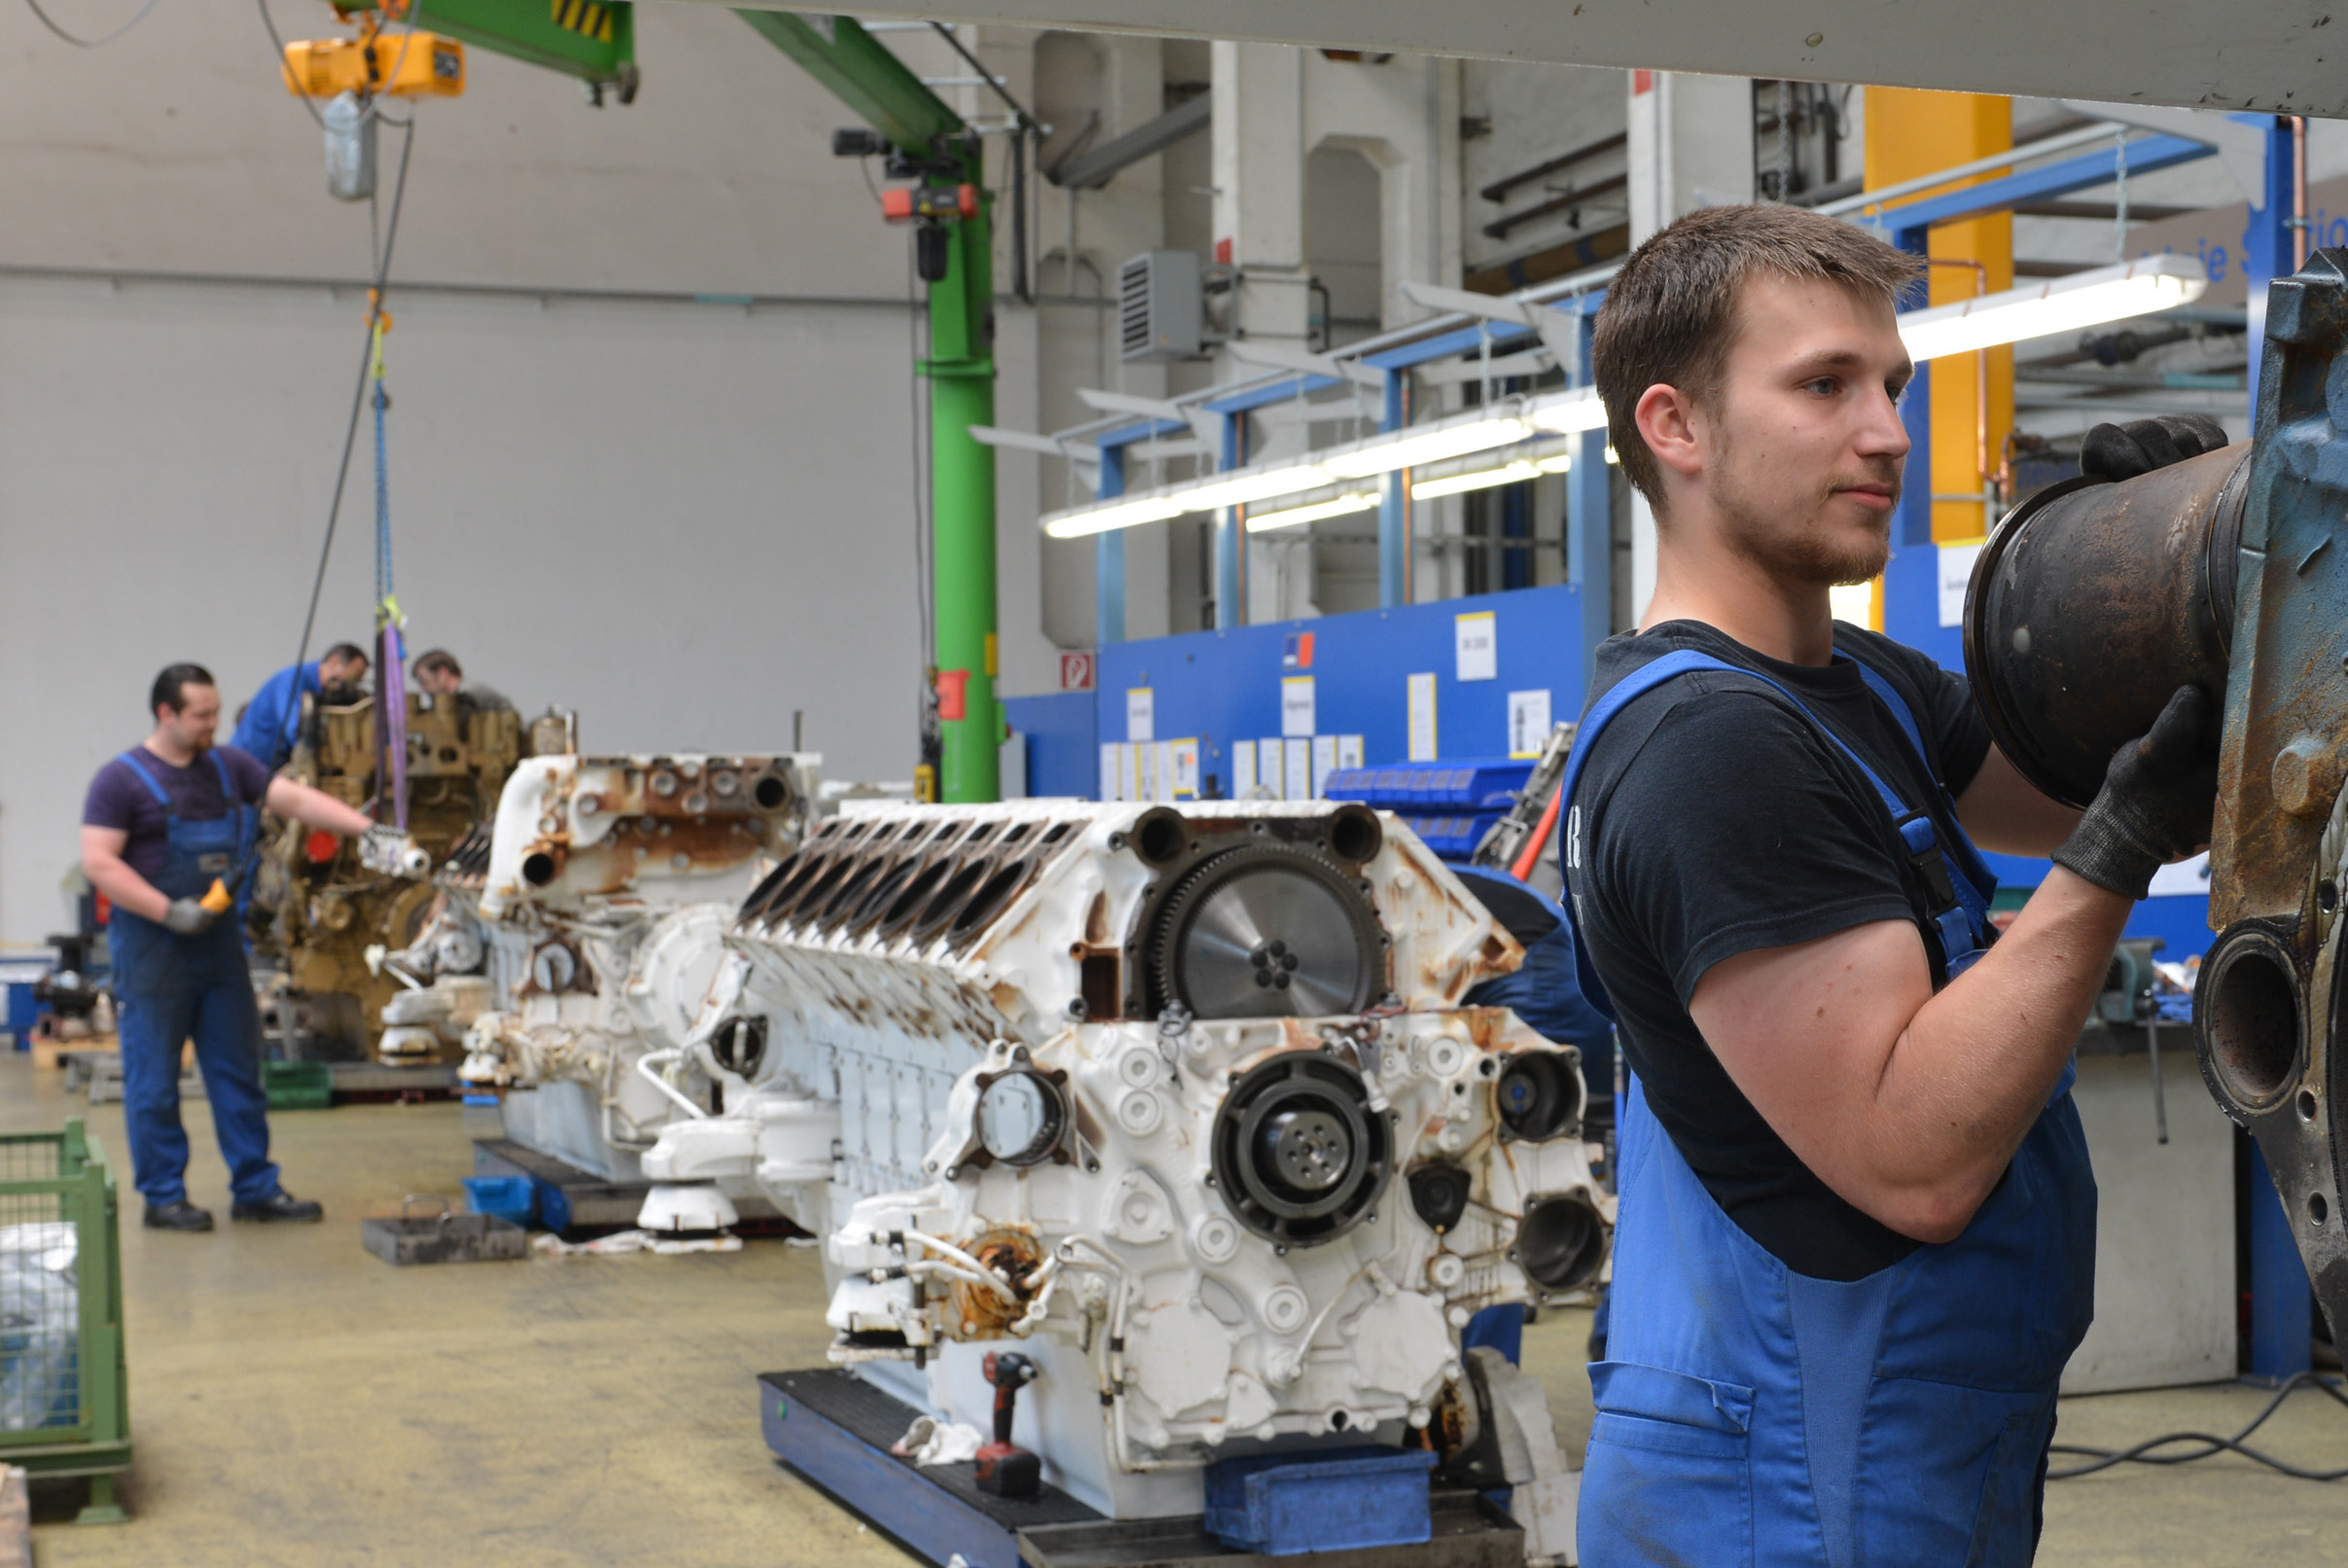 Rolls-Royce will create a remanufacturing and overhaul regional centre at its mtu Aiken manufacturing facility in US, similar to operations at the company’s plant in Magdeburg, Germany, as seen here (image courtesy Rolls Royce Power Systems)